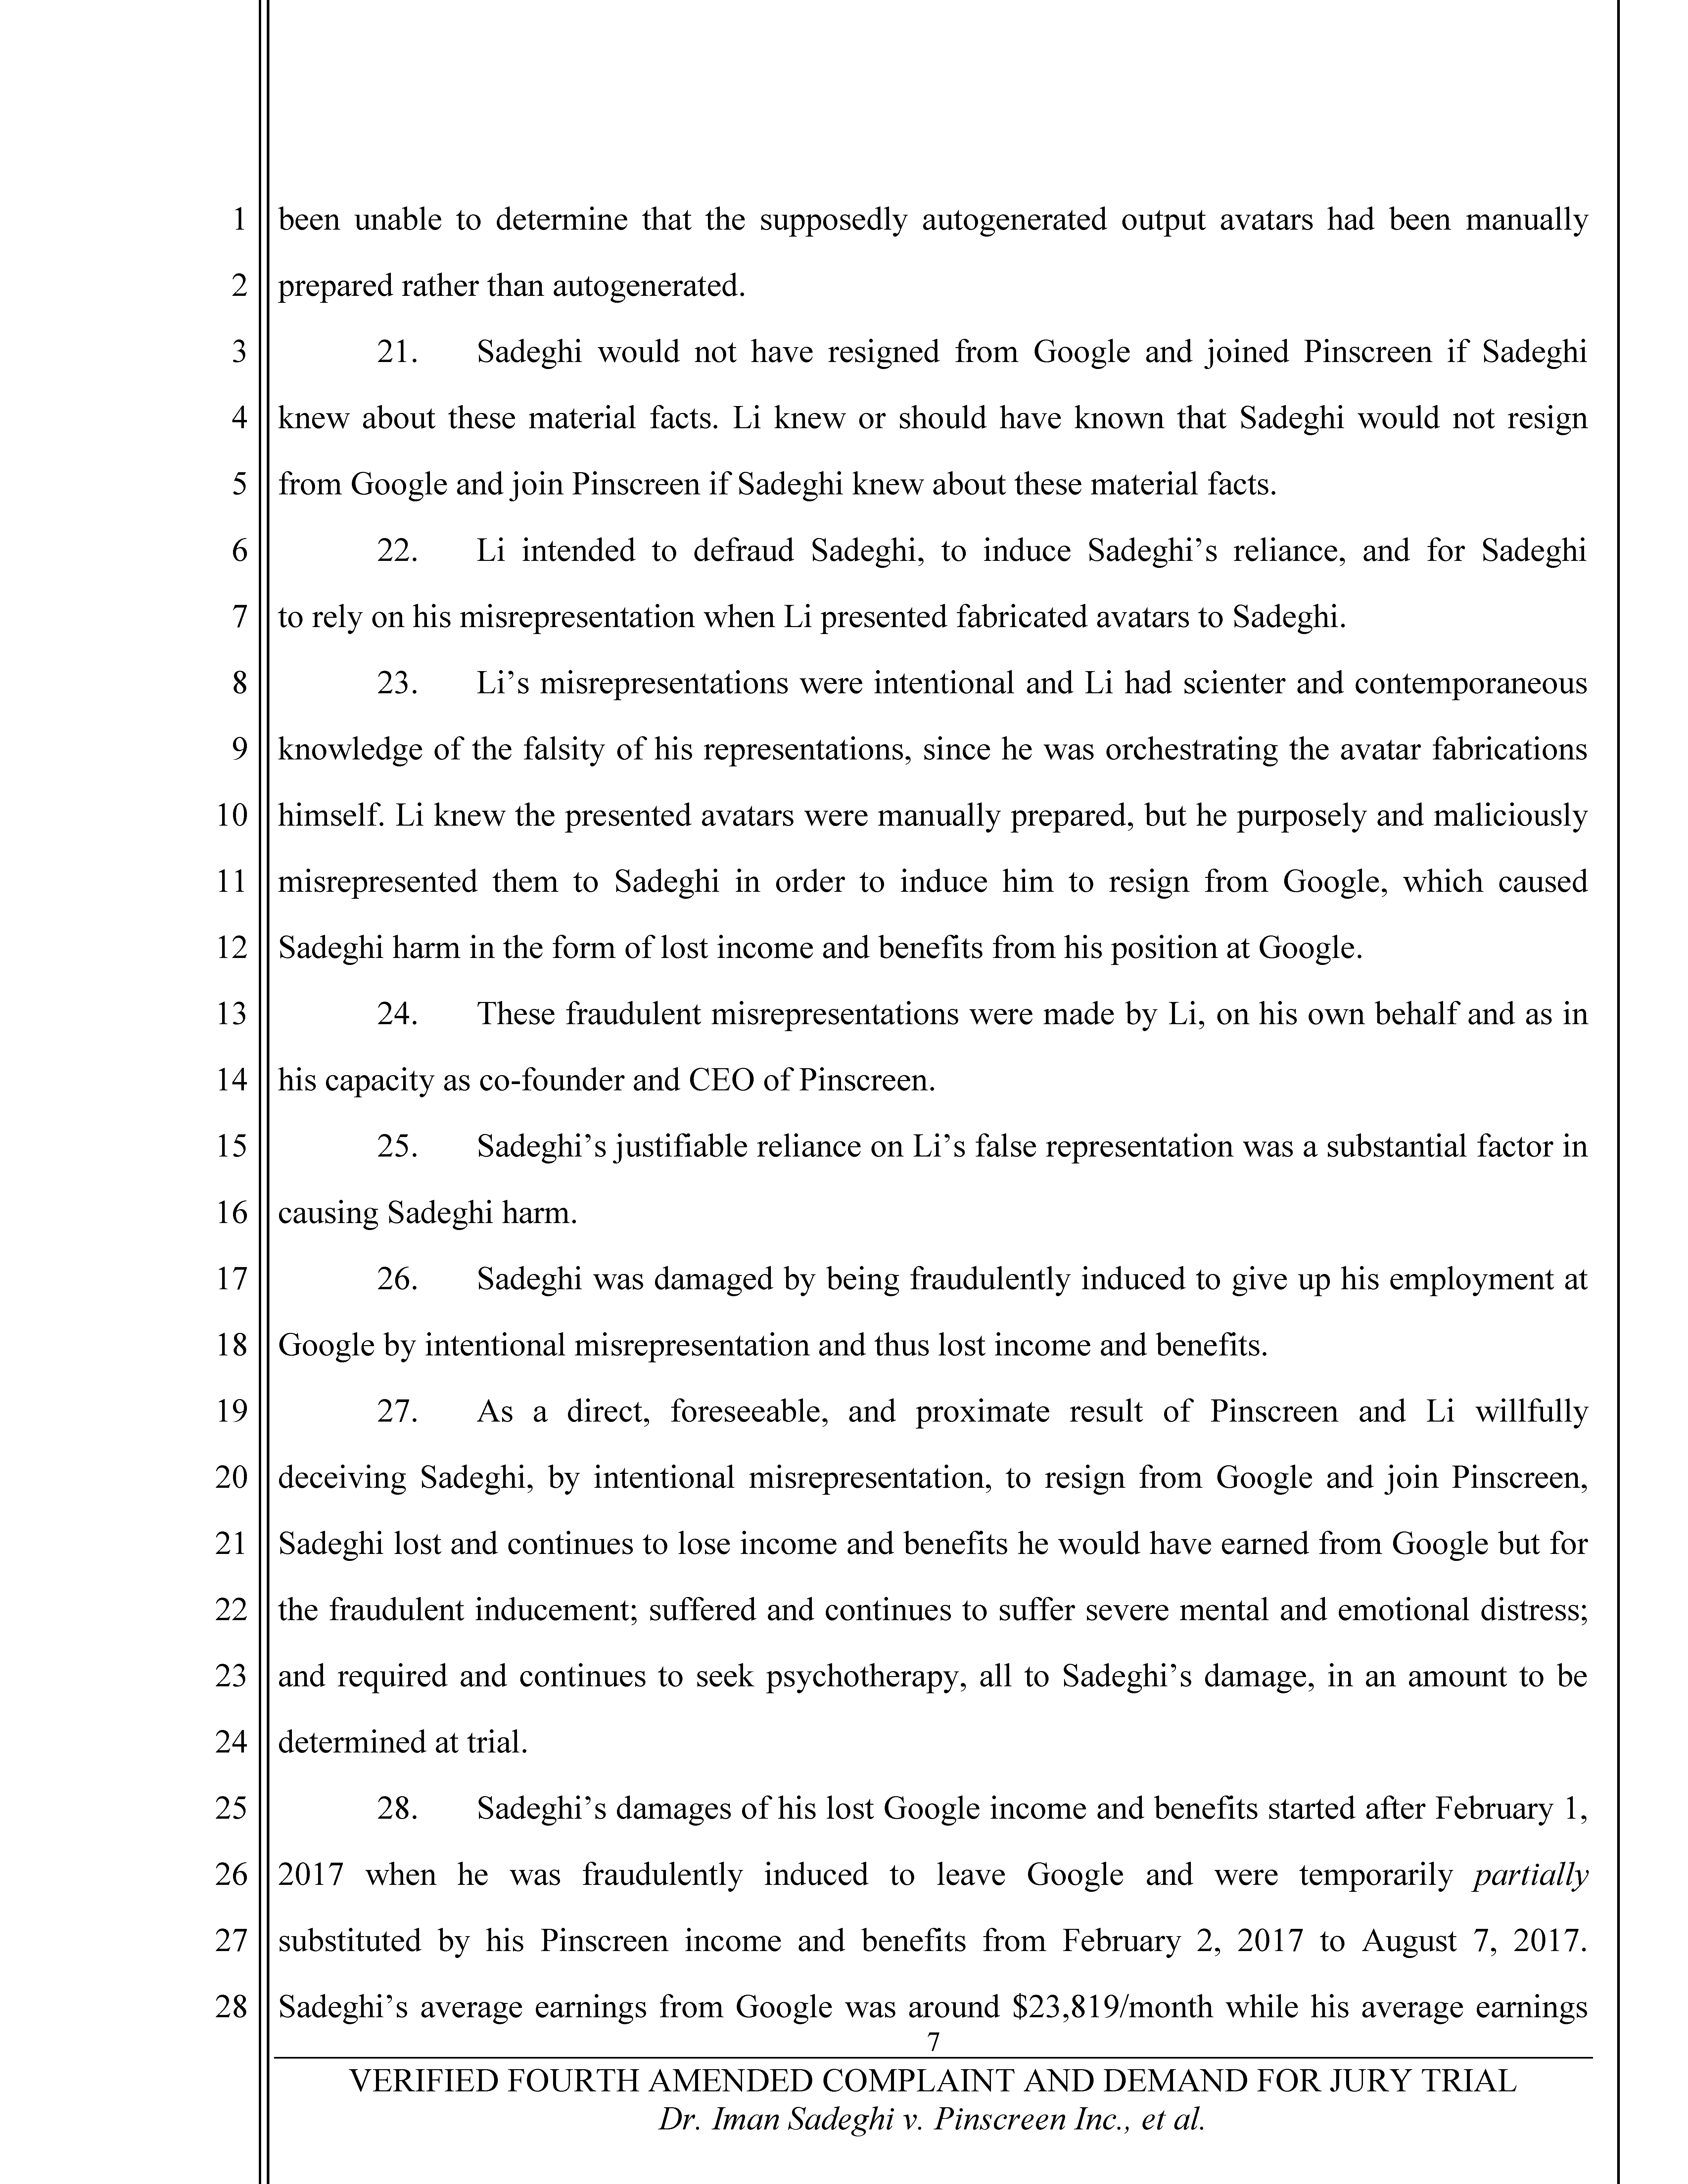 Fourth Amended Complaint (4AC) Page 8